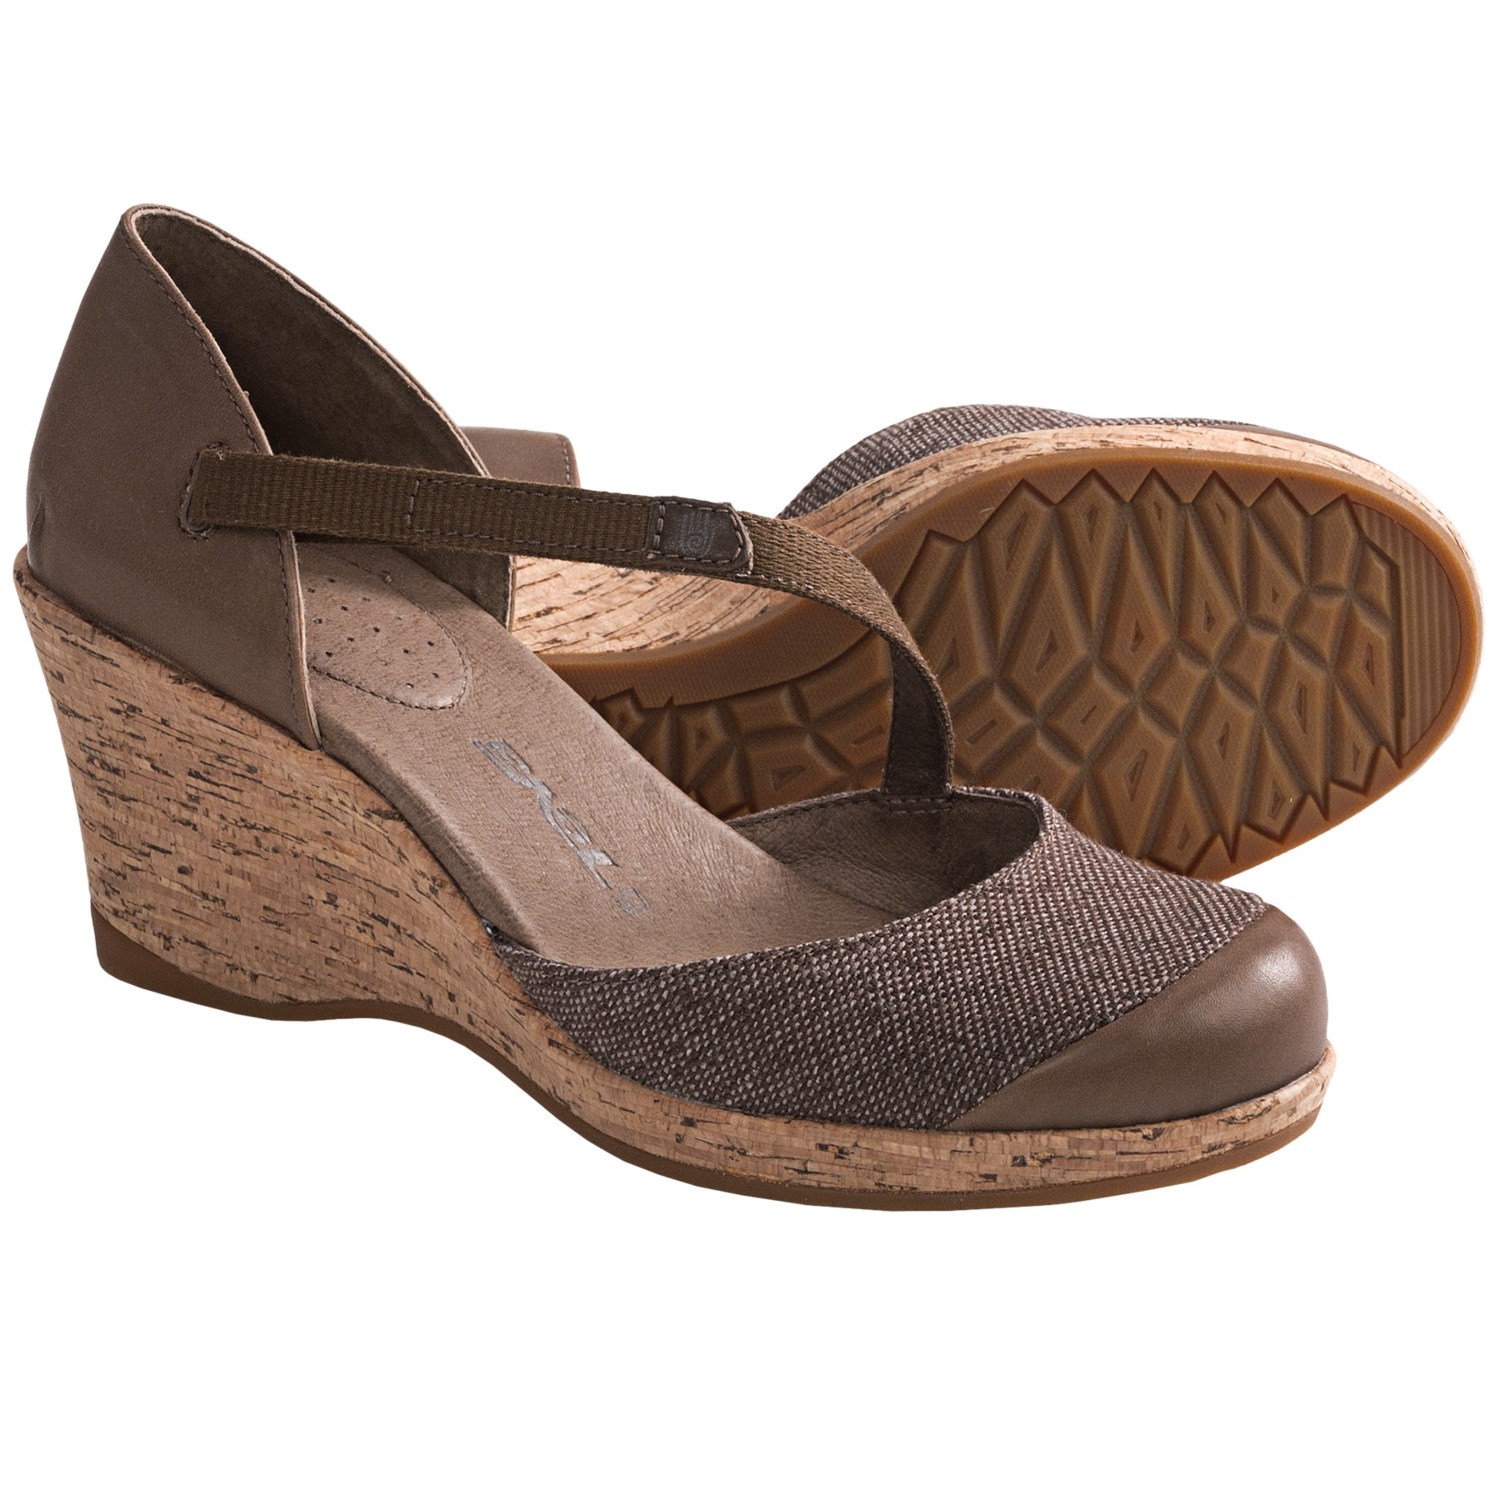 Teva Riviera Wedge MJ Shoes - Leather (For Women) in Brown